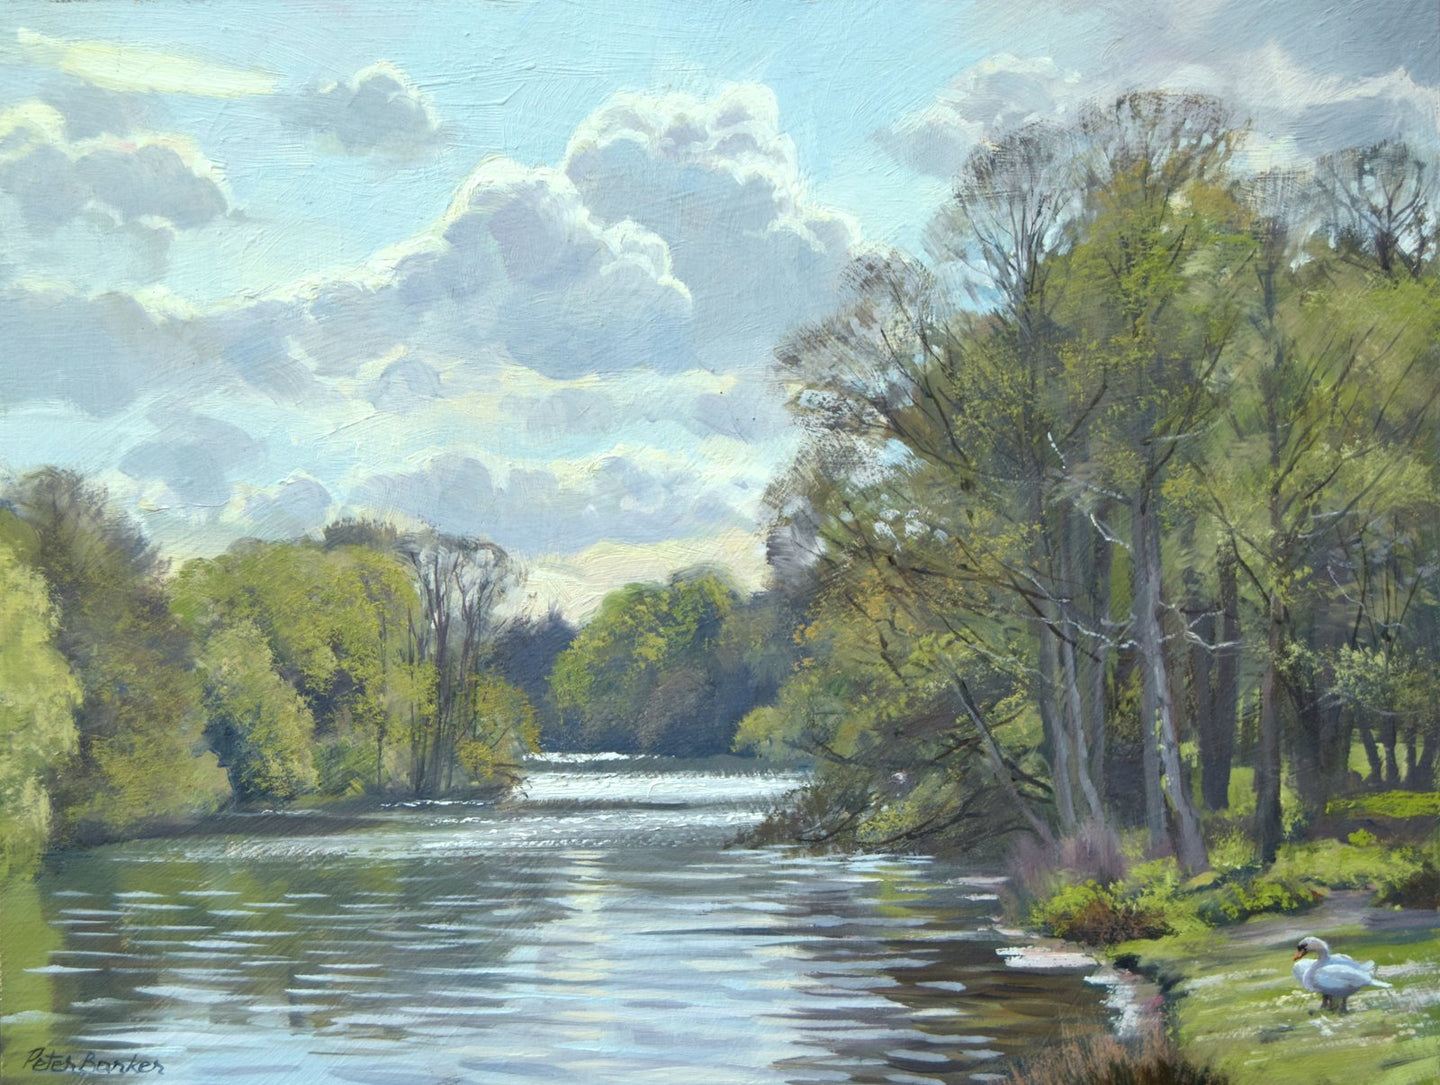 A 9 x 12 inch oil painting of the lake at Clumber park in Spring, looking into the sunlight, lots of puffy clouds and ripply reflections, with a pair of Swans on the near right-hand bank.